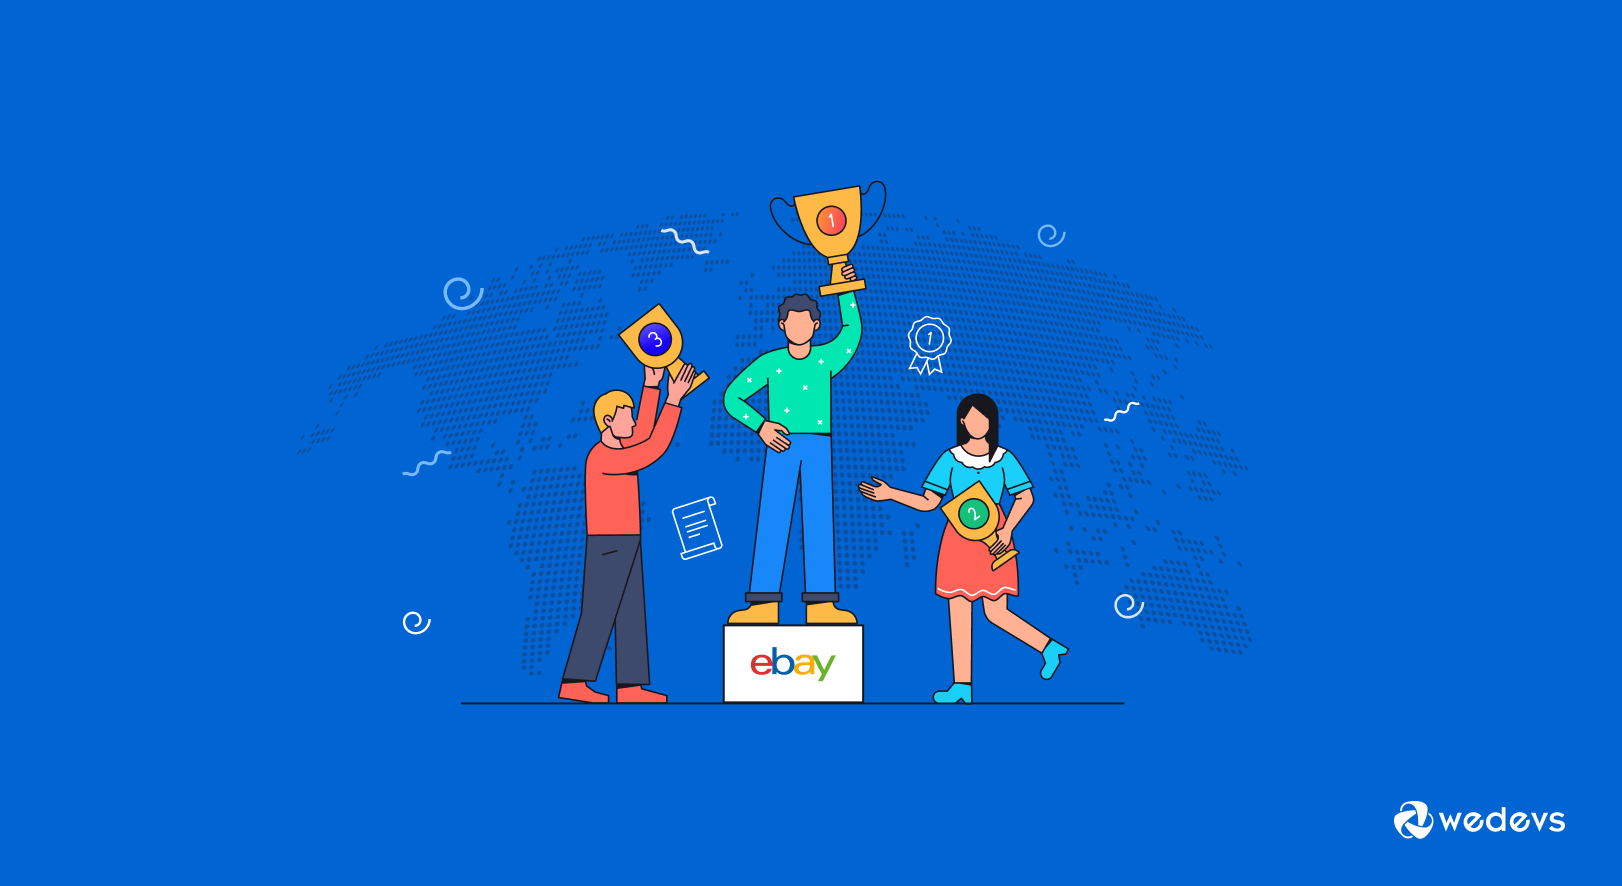 eBay Success Story: From Zero to the Global eCommerce Business Leader